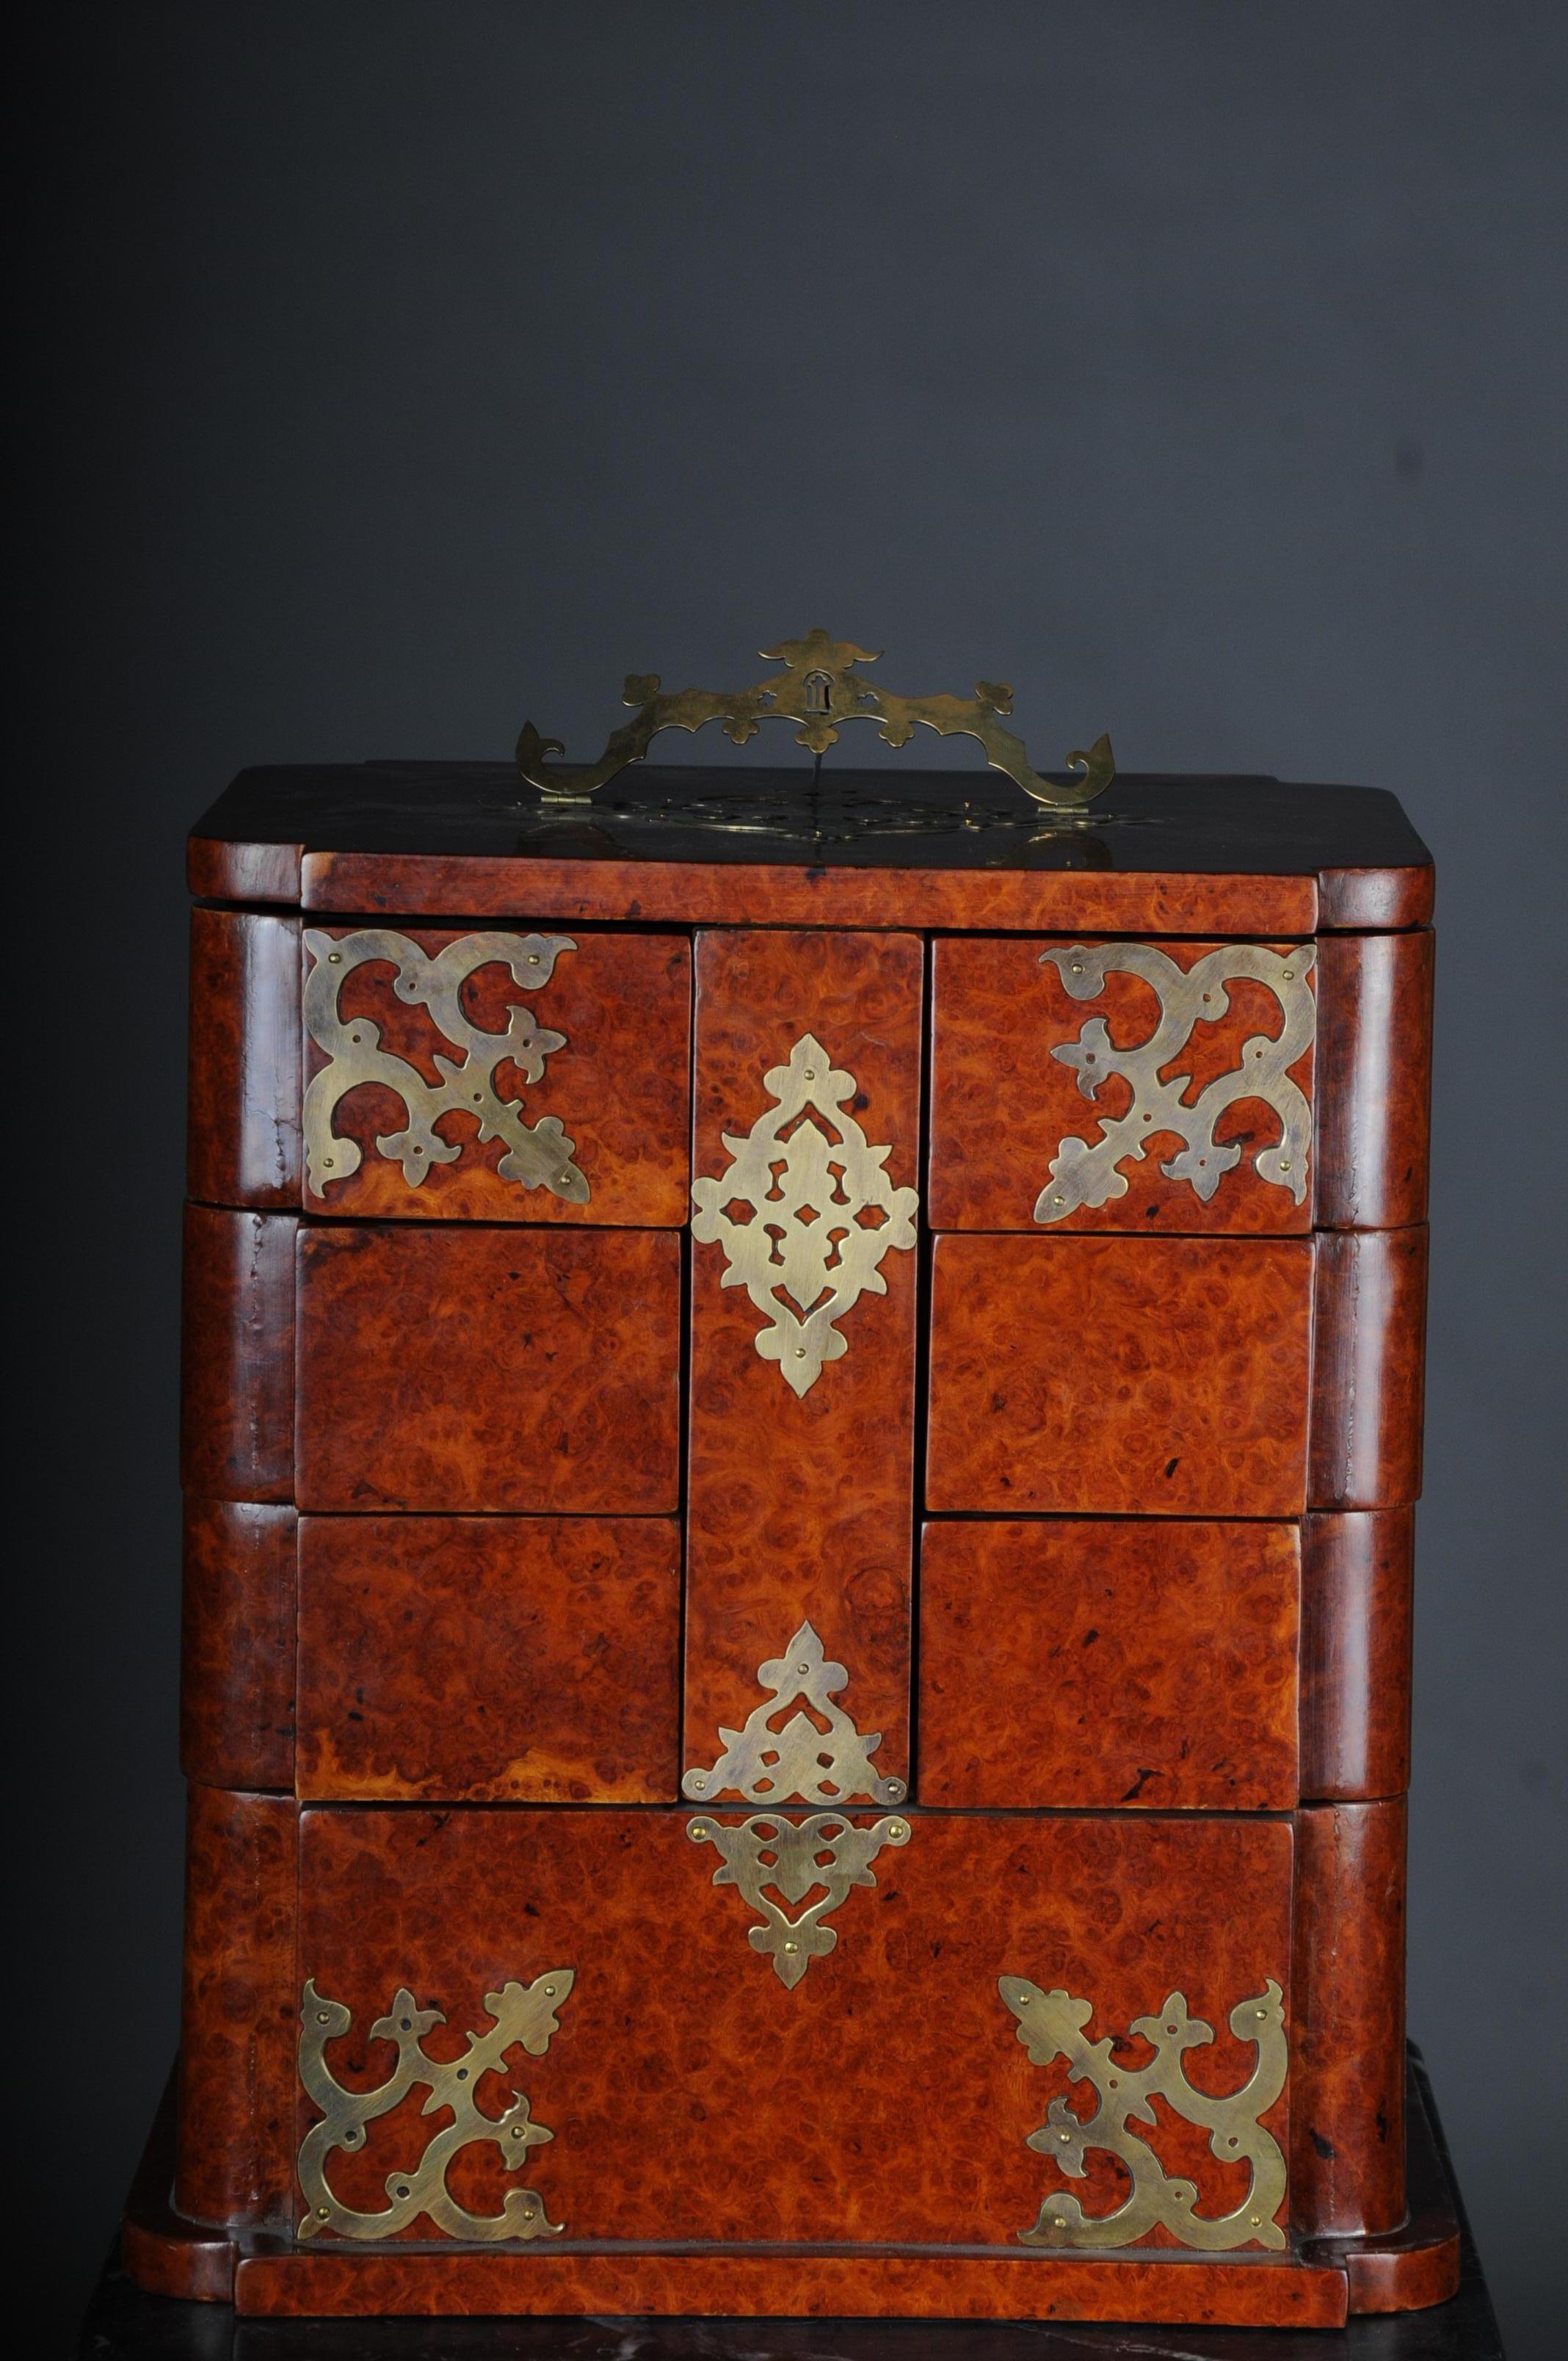 Art Deco jewelry box
Covered with velvet
Bird's-eye maple on solid wood
Brass fittings
(T-SAM-51)